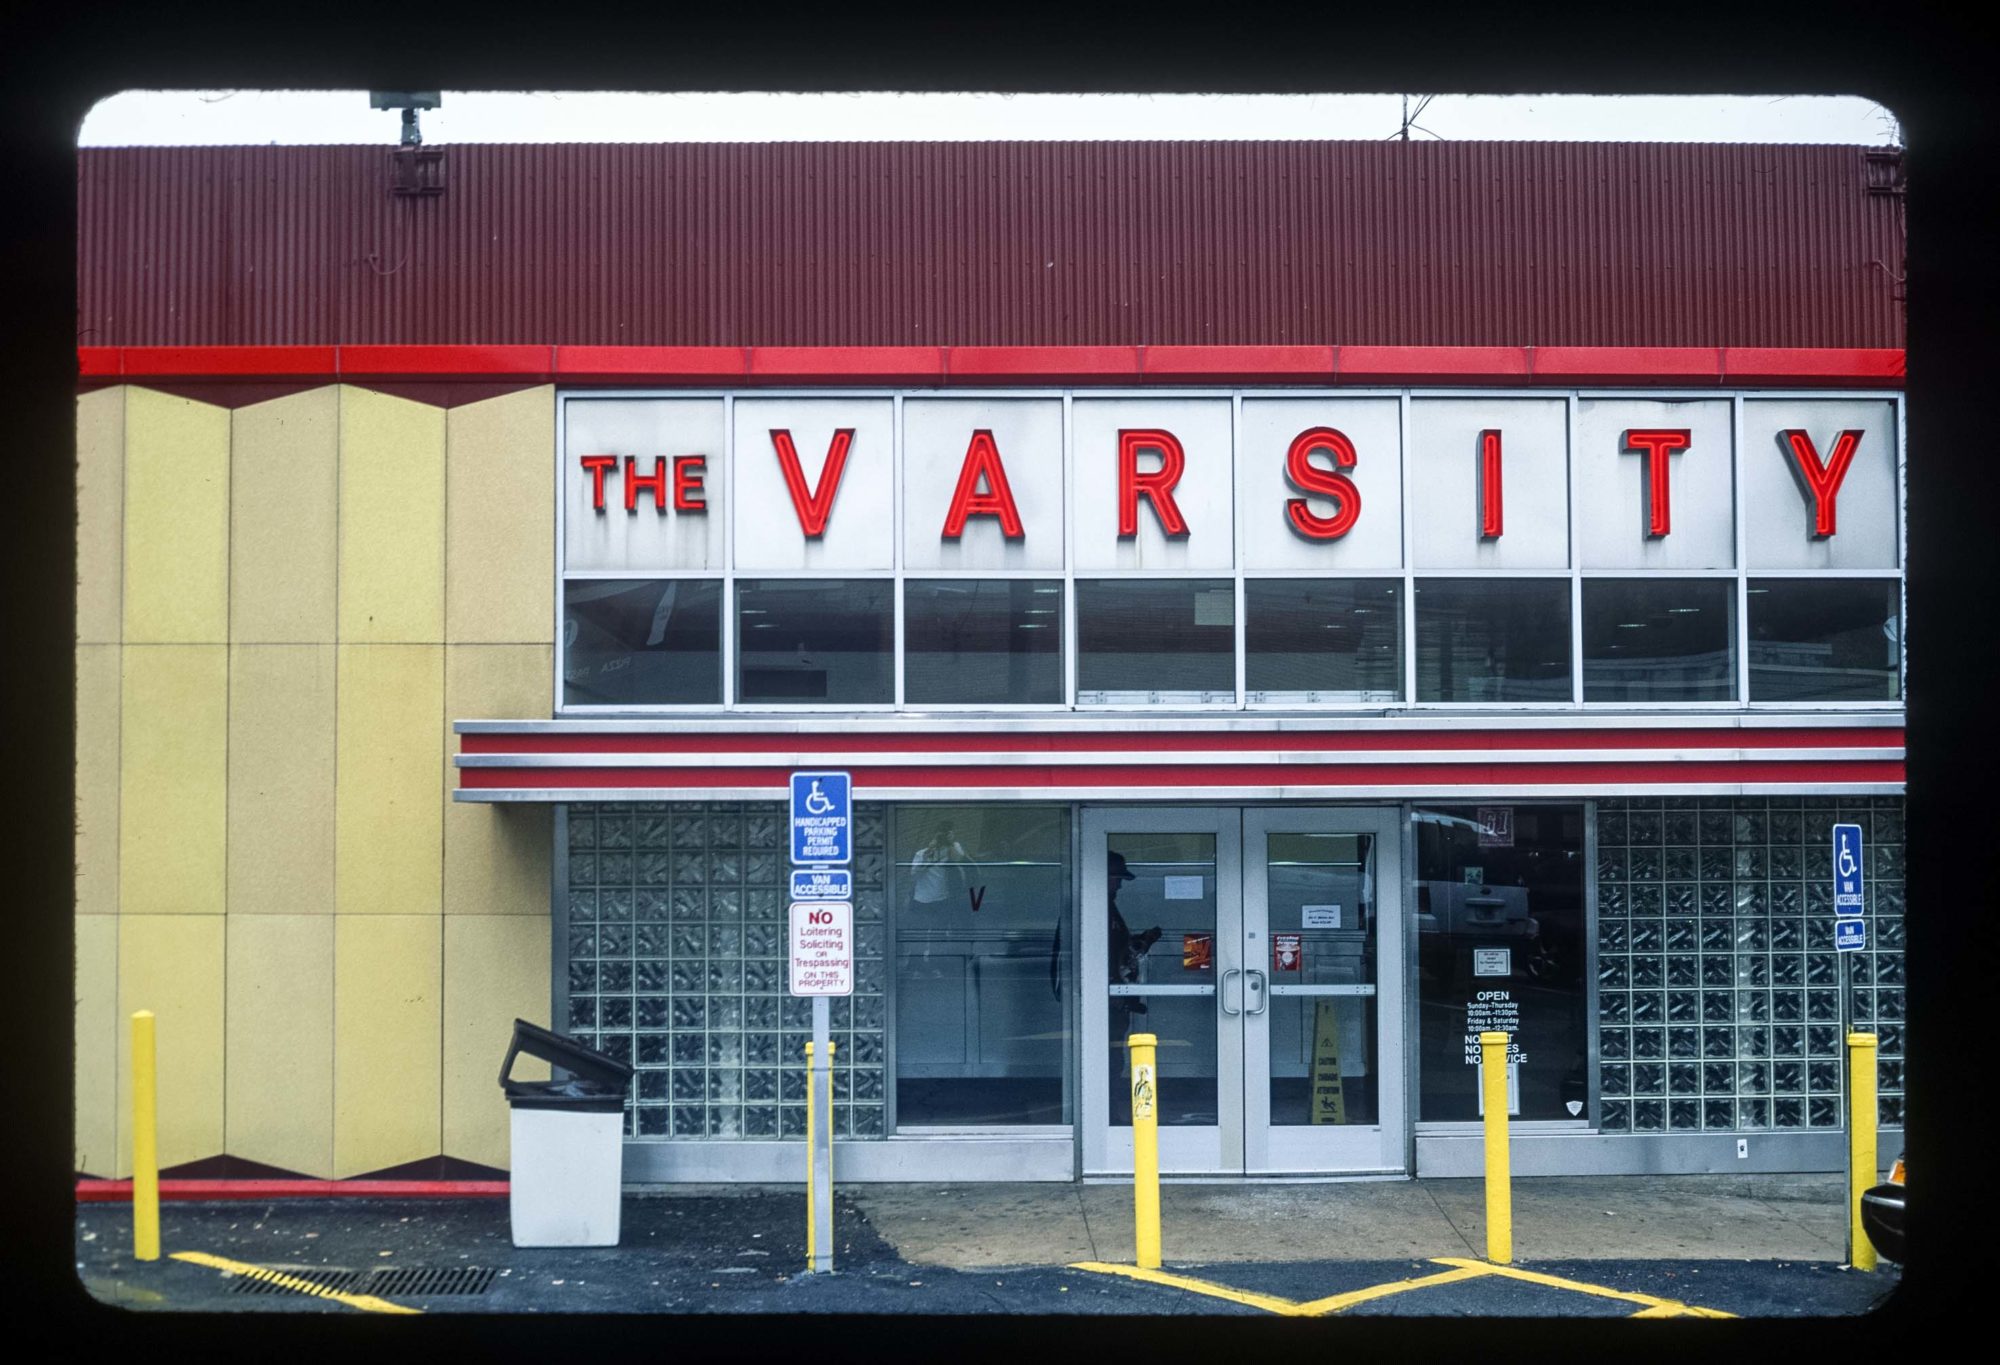 The front entrance of The Varsity